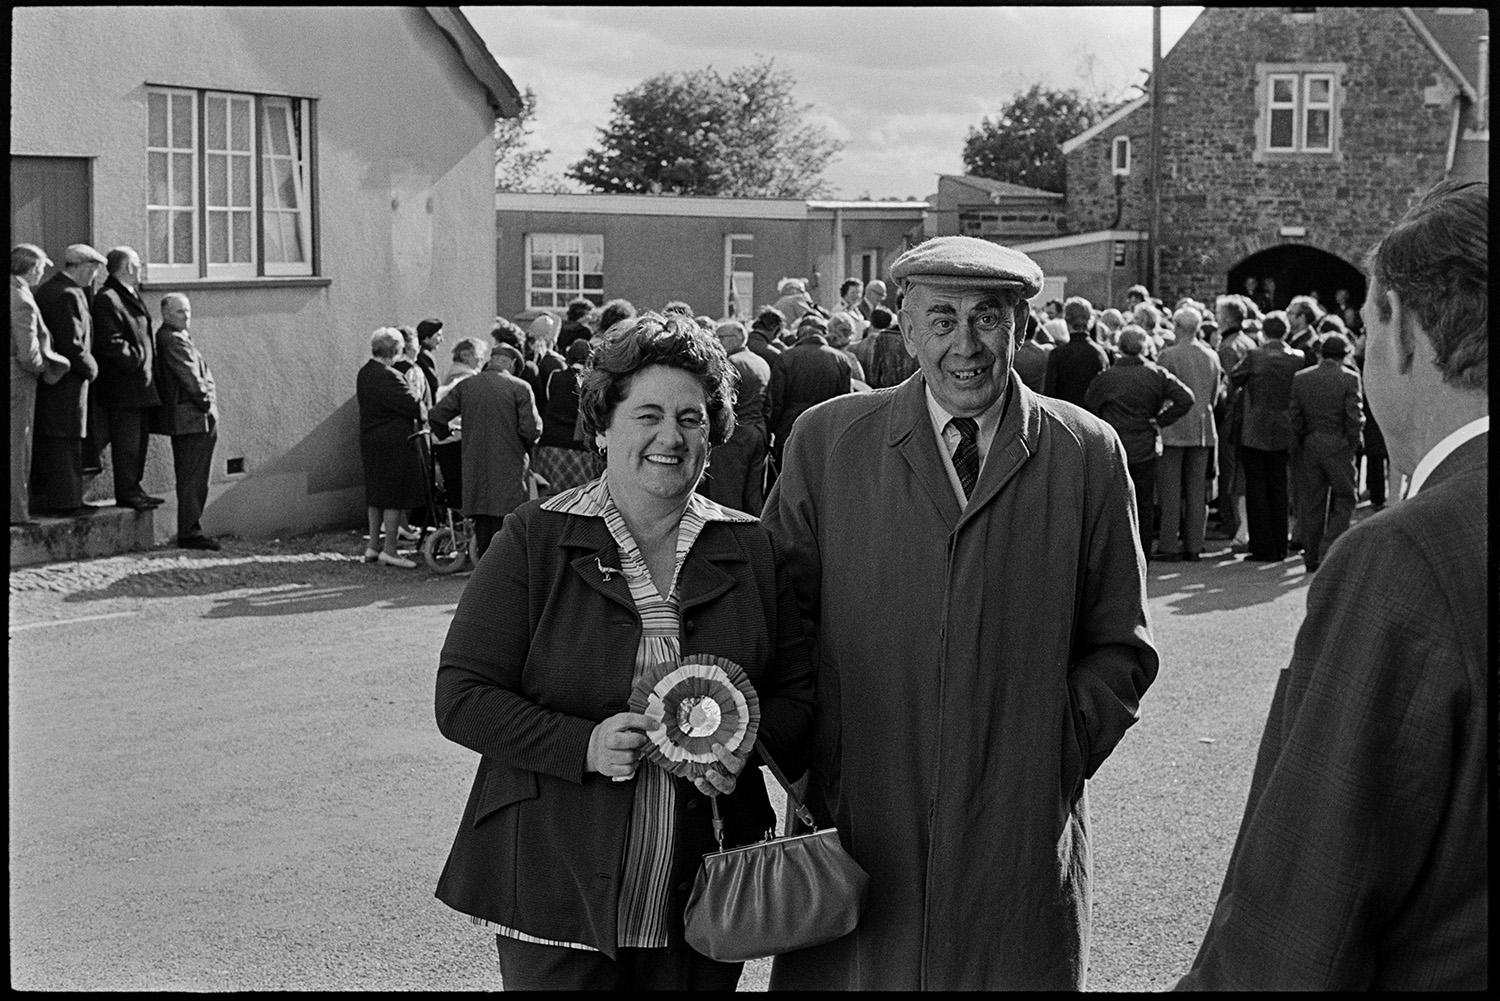 Presentation of mugs in street crowd watching. 
[A man and woman posing for a photograph in a street in High Bickington at the celebrations for the Silver Jubilee of Queen Elizabeth II. The woman is holding a rosette. A crowd in the background are watching a presentation of mugs to children from the village.]